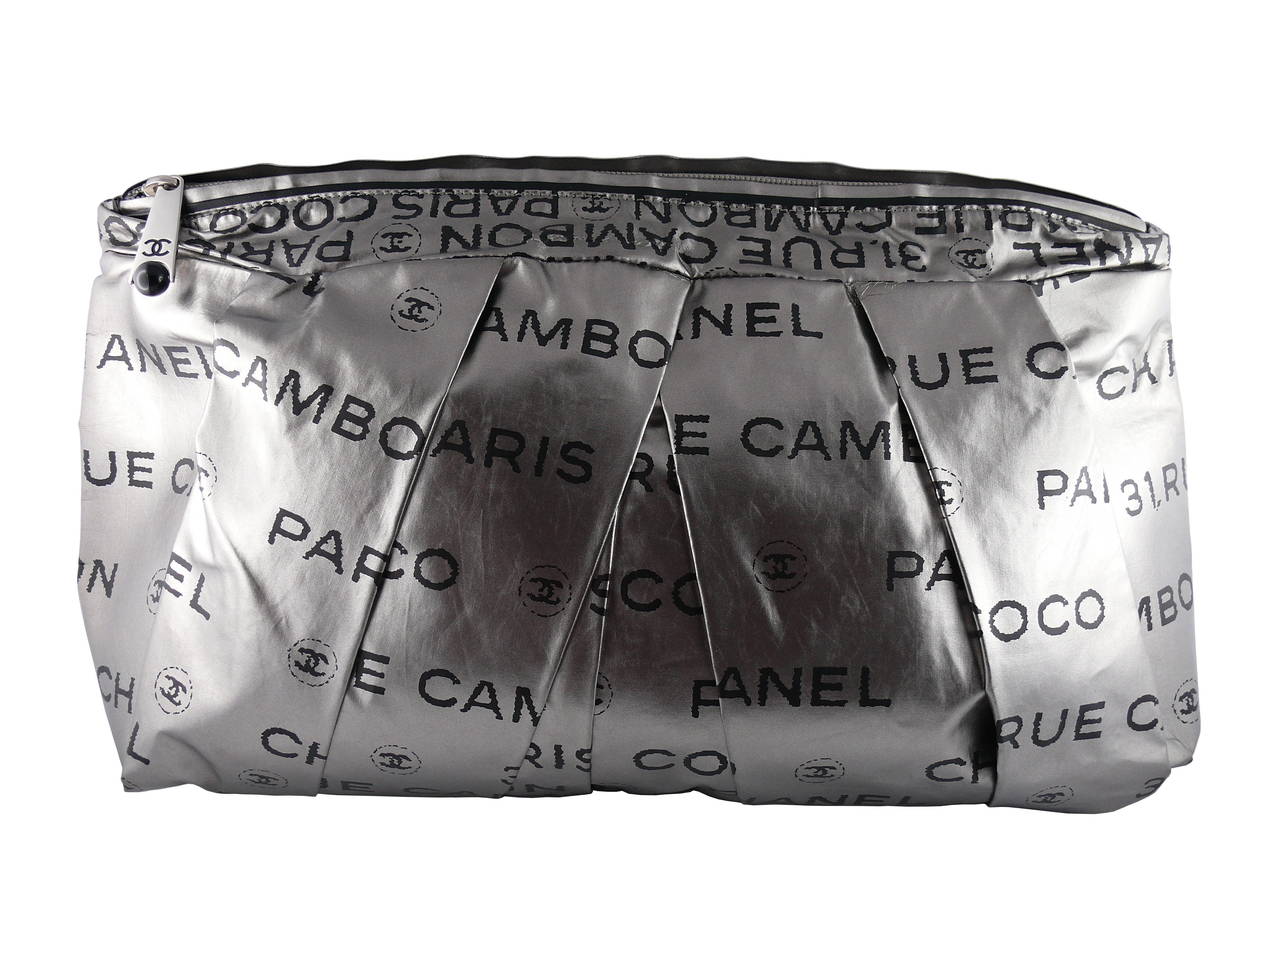 CHANEL Unlimited Line clutch from the Spring 2009 collection.

Pleated metallic silver fabric printed with 